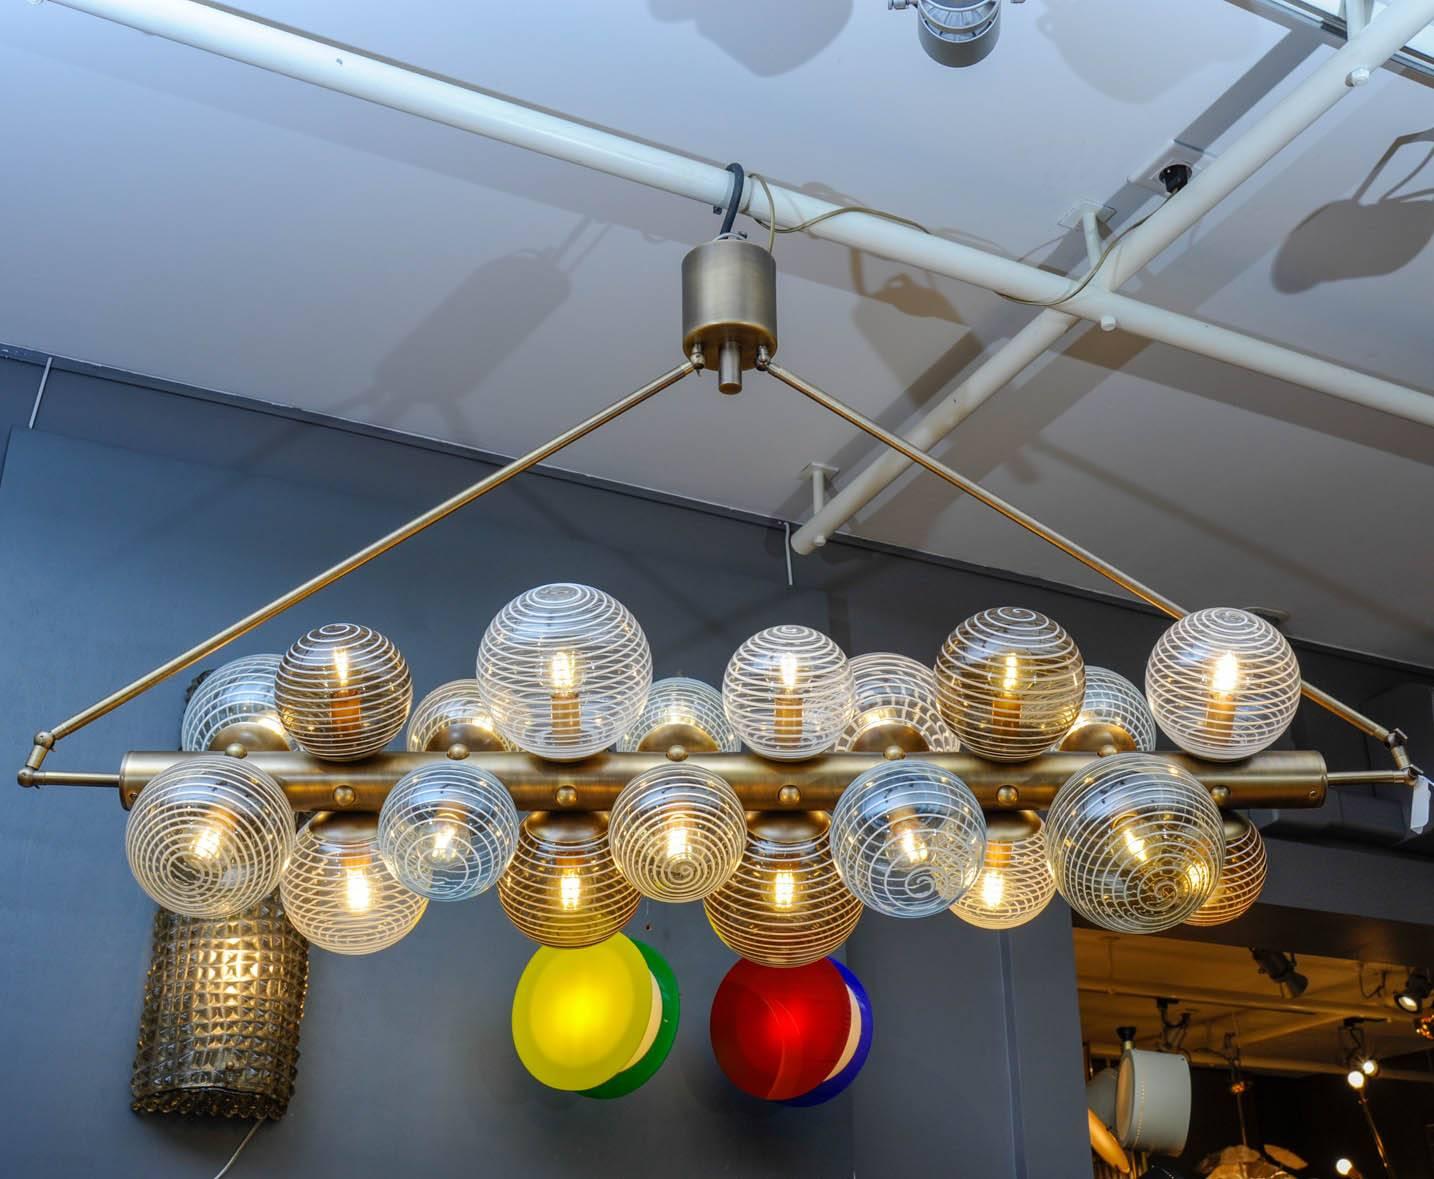 New chandelier by Glustin Luminaires, bronze finish brass central rod with twenty Murano glass globes with color swirls in them.